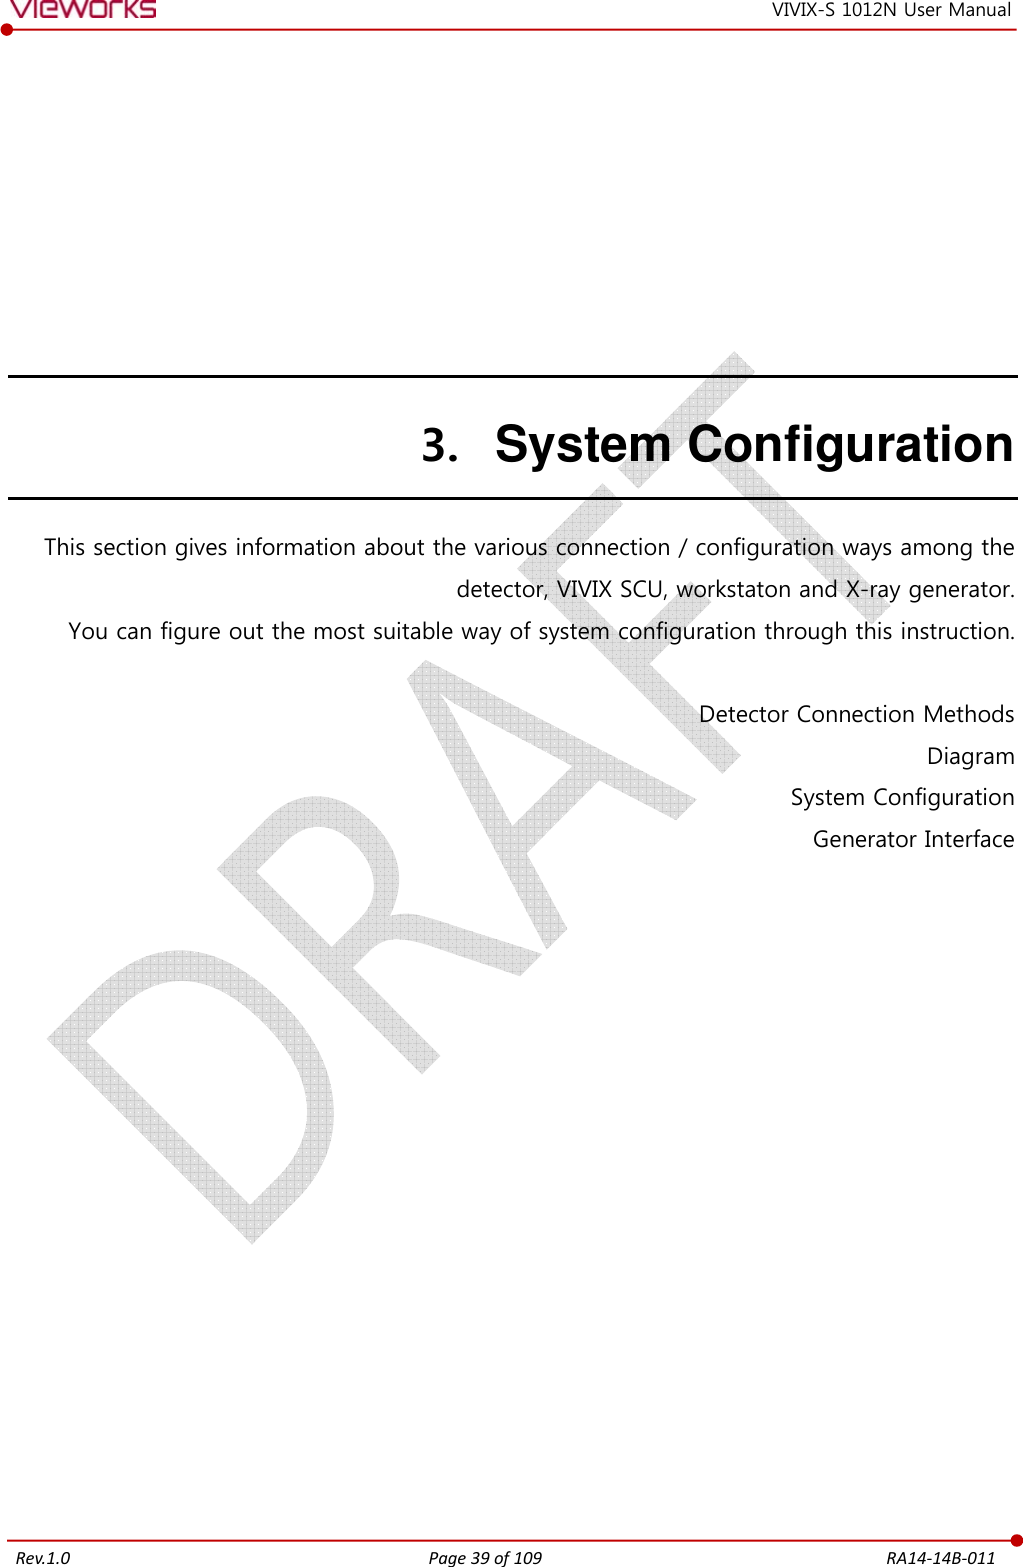   Rev.1.0 Page 39 of 109  RA14-14B-011 VIVIX-S 1012N User Manual 3. System Configuration This section gives information about the various connection / configuration ways among the detector, VIVIX SCU, workstaton and X-ray generator. You can figure out the most suitable way of system configuration through this instruction.  Detector Connection Methods Diagram System Configuration Generator Interface             